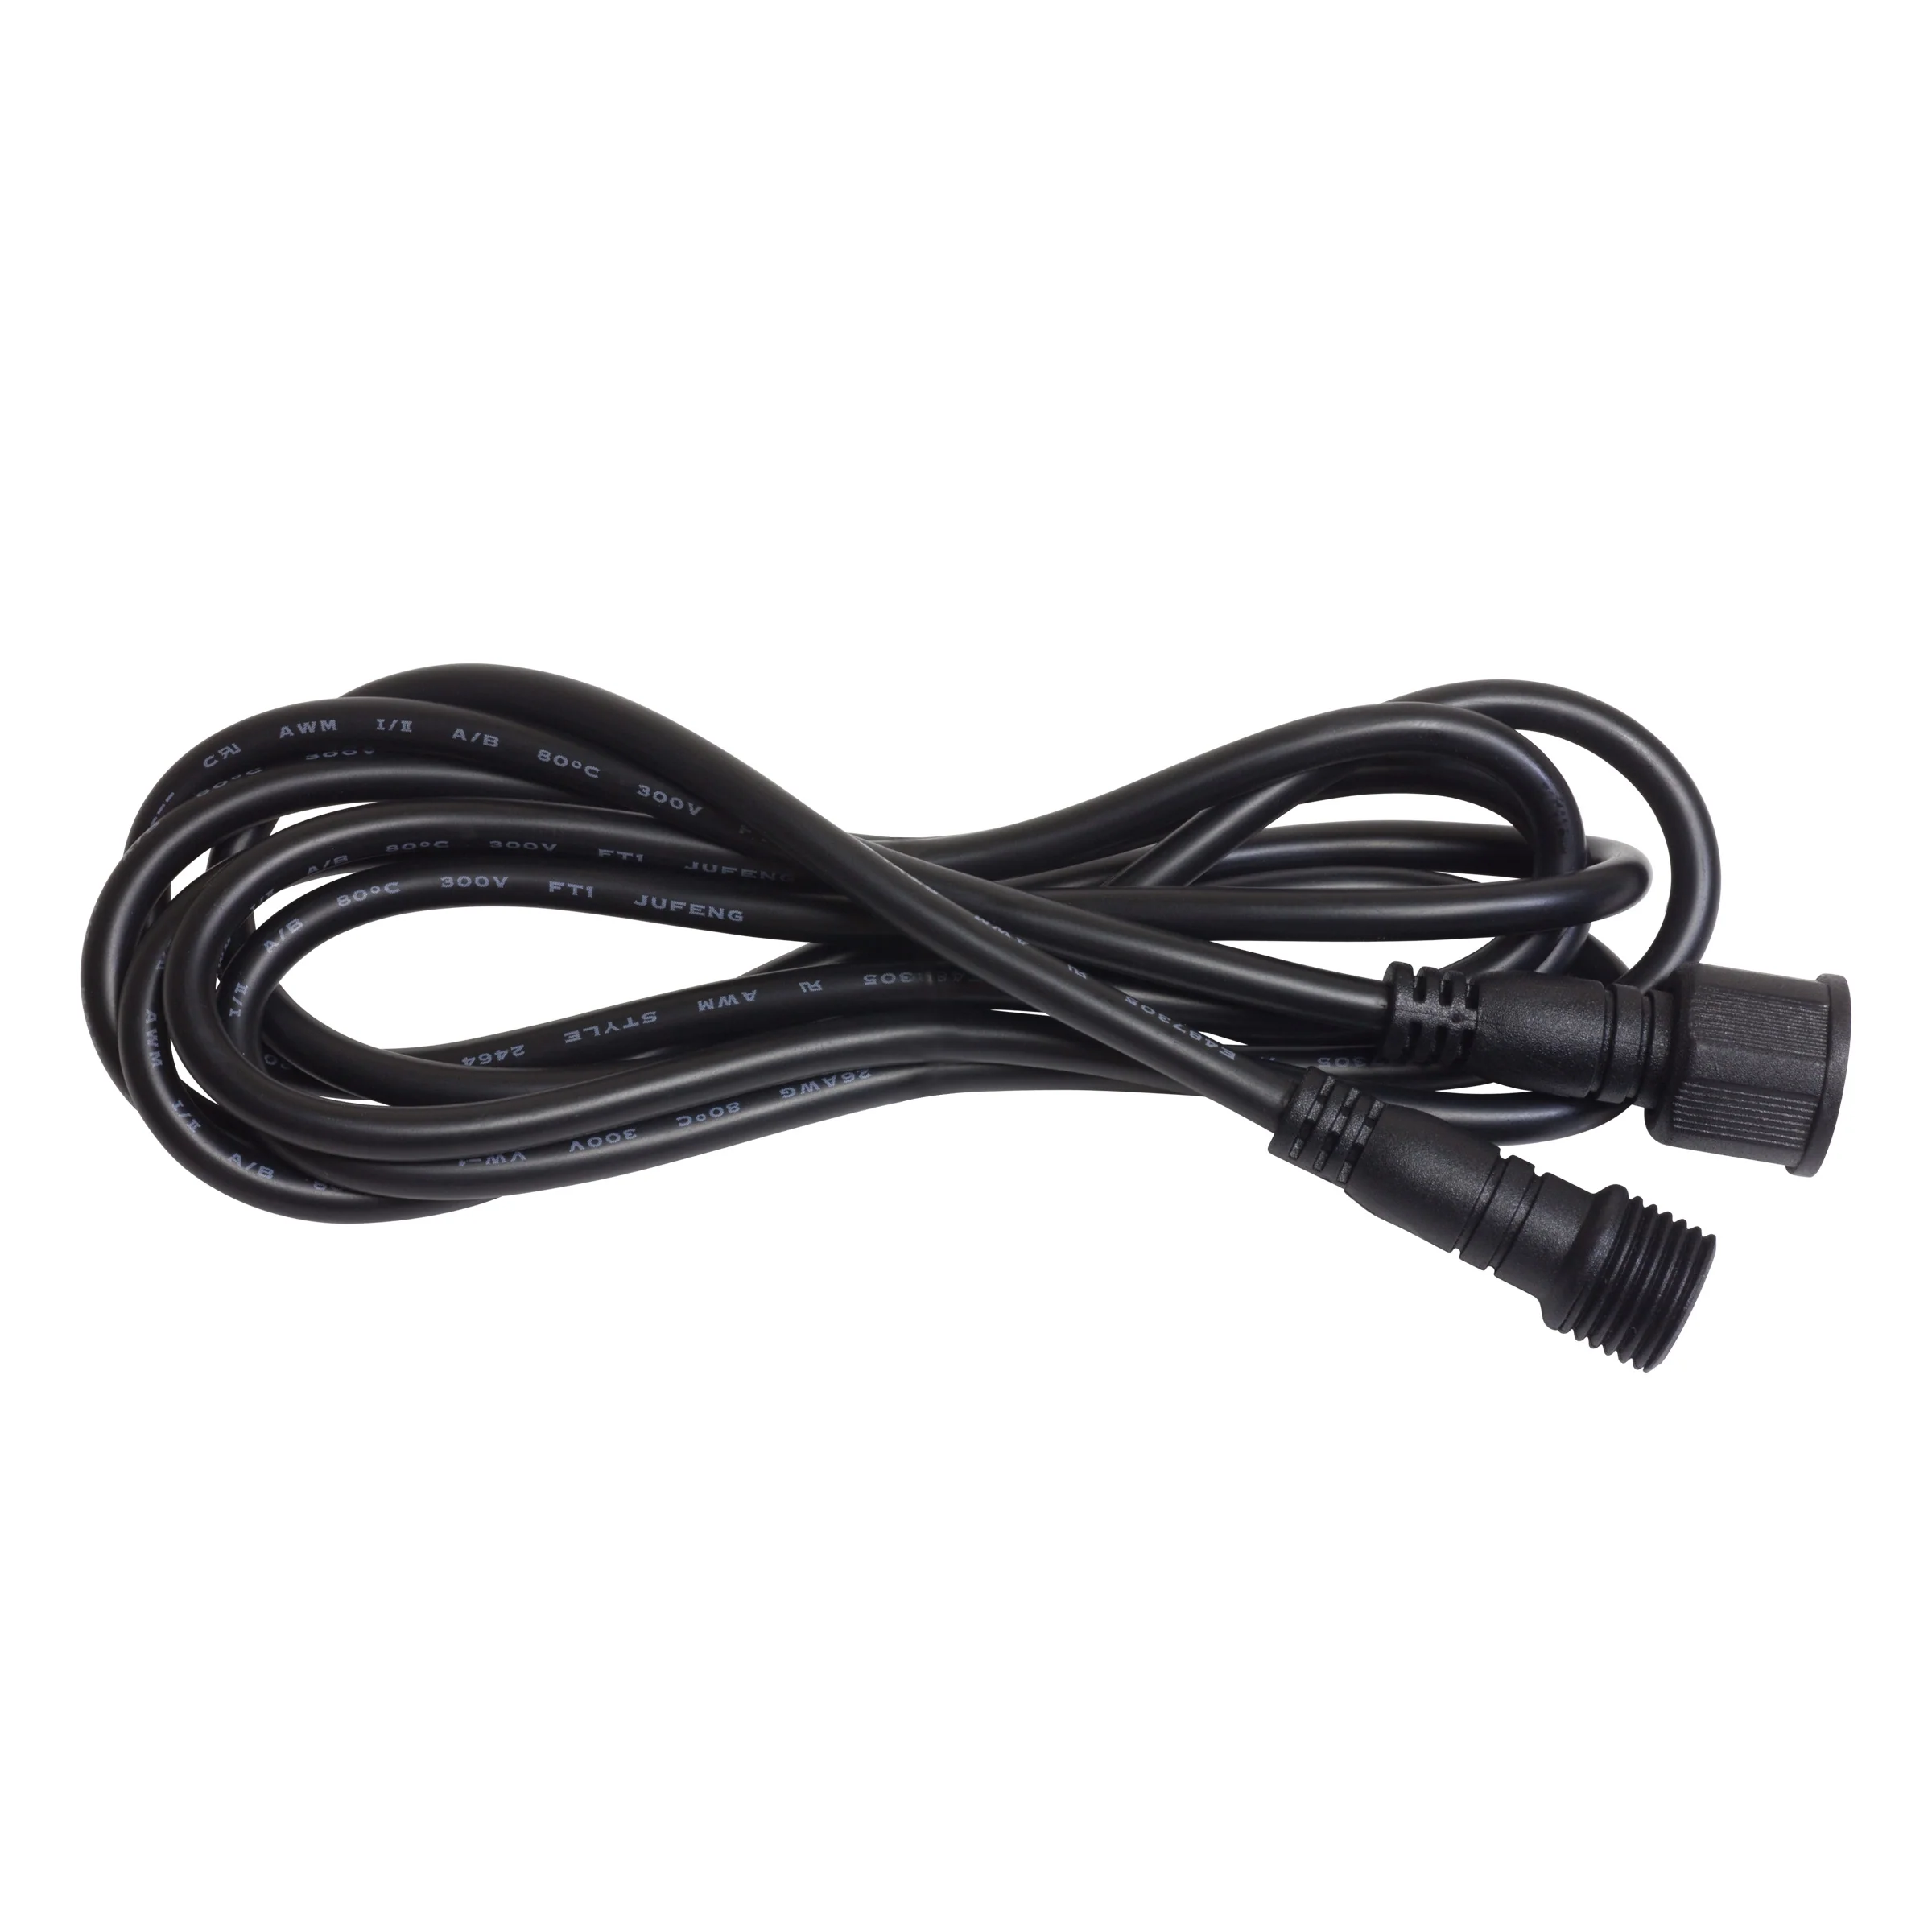 Is this cable compatible with the Briidea Plug-ANG-Play Power Switching System,